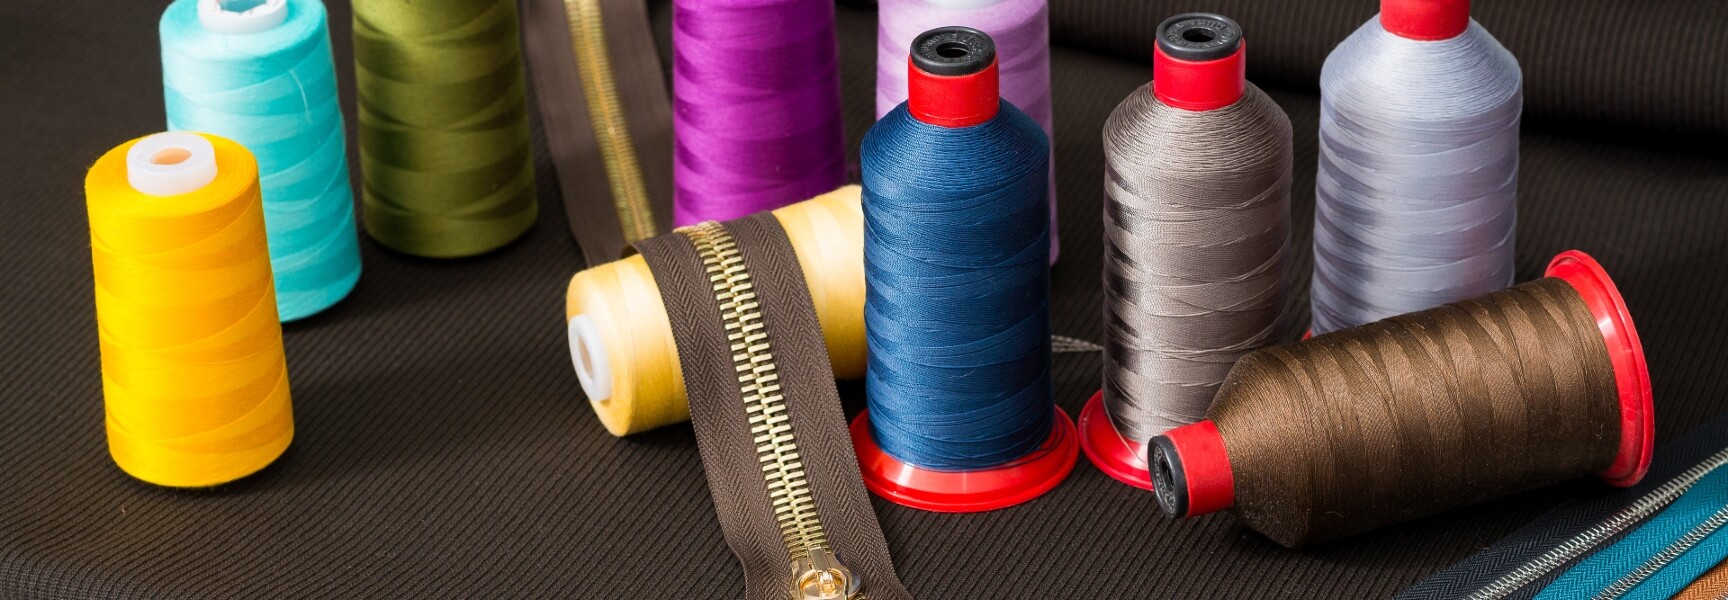 A close-up image of a zipper and different spools of thread.